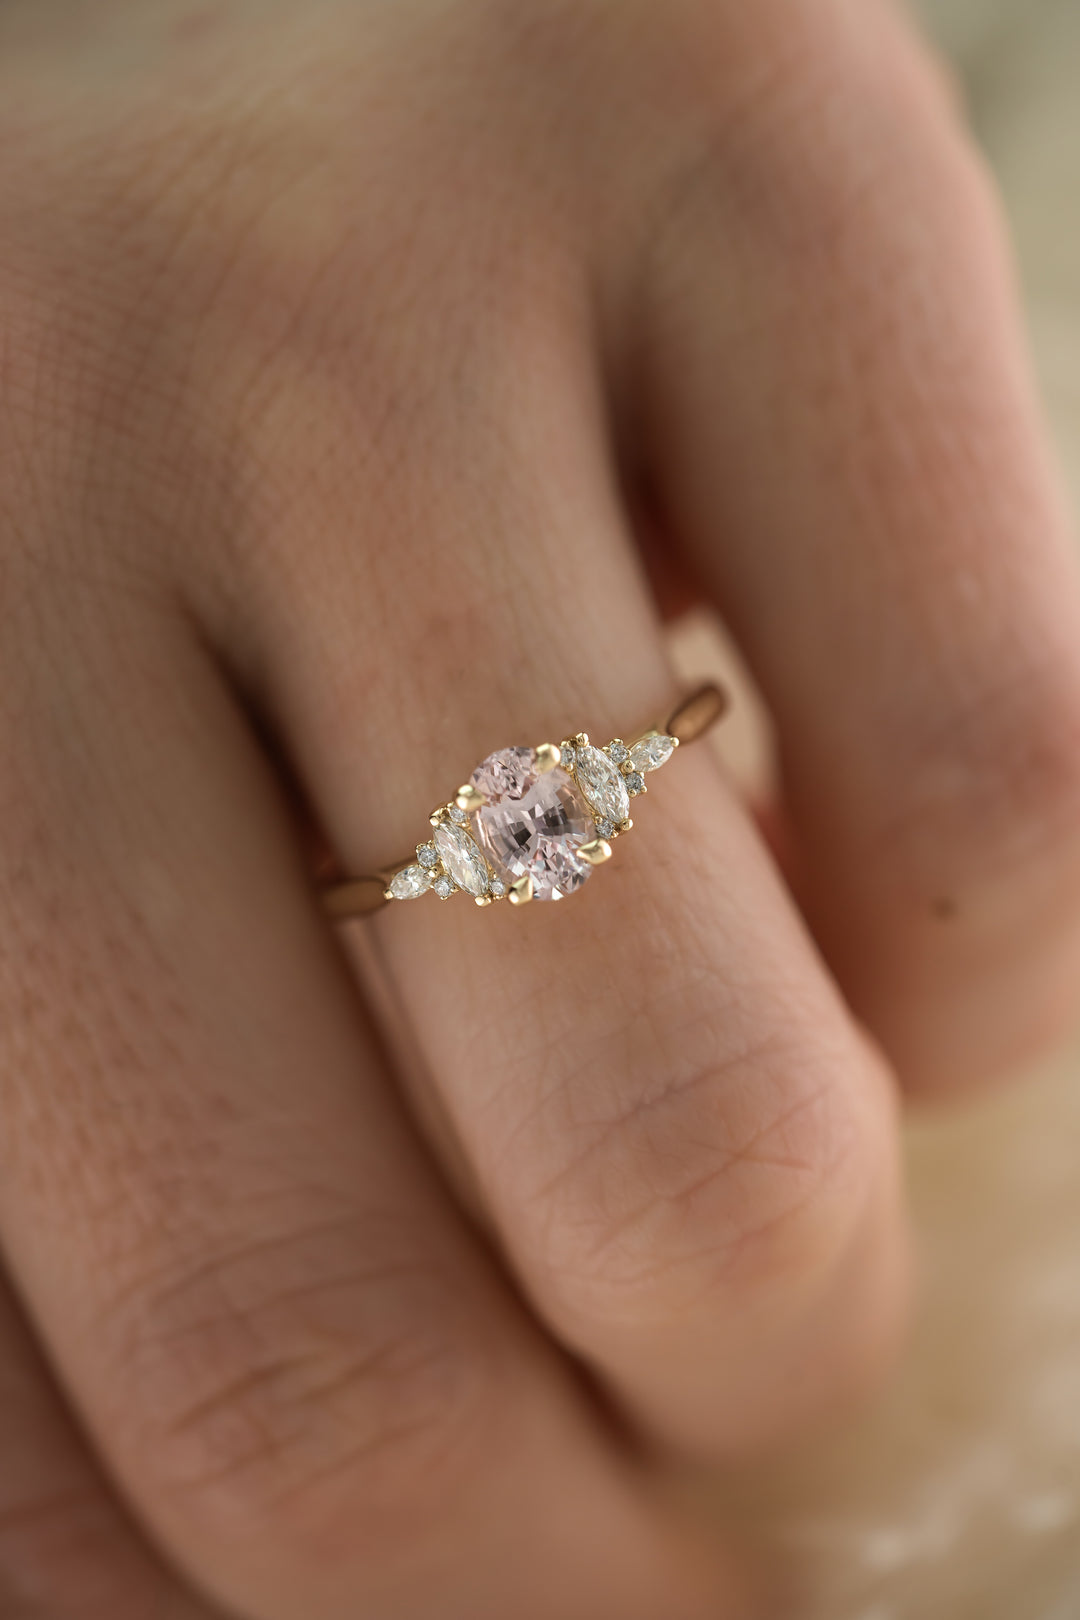 The Maeve 0.94 CT Oval Pastel Pink Sapphire Ring